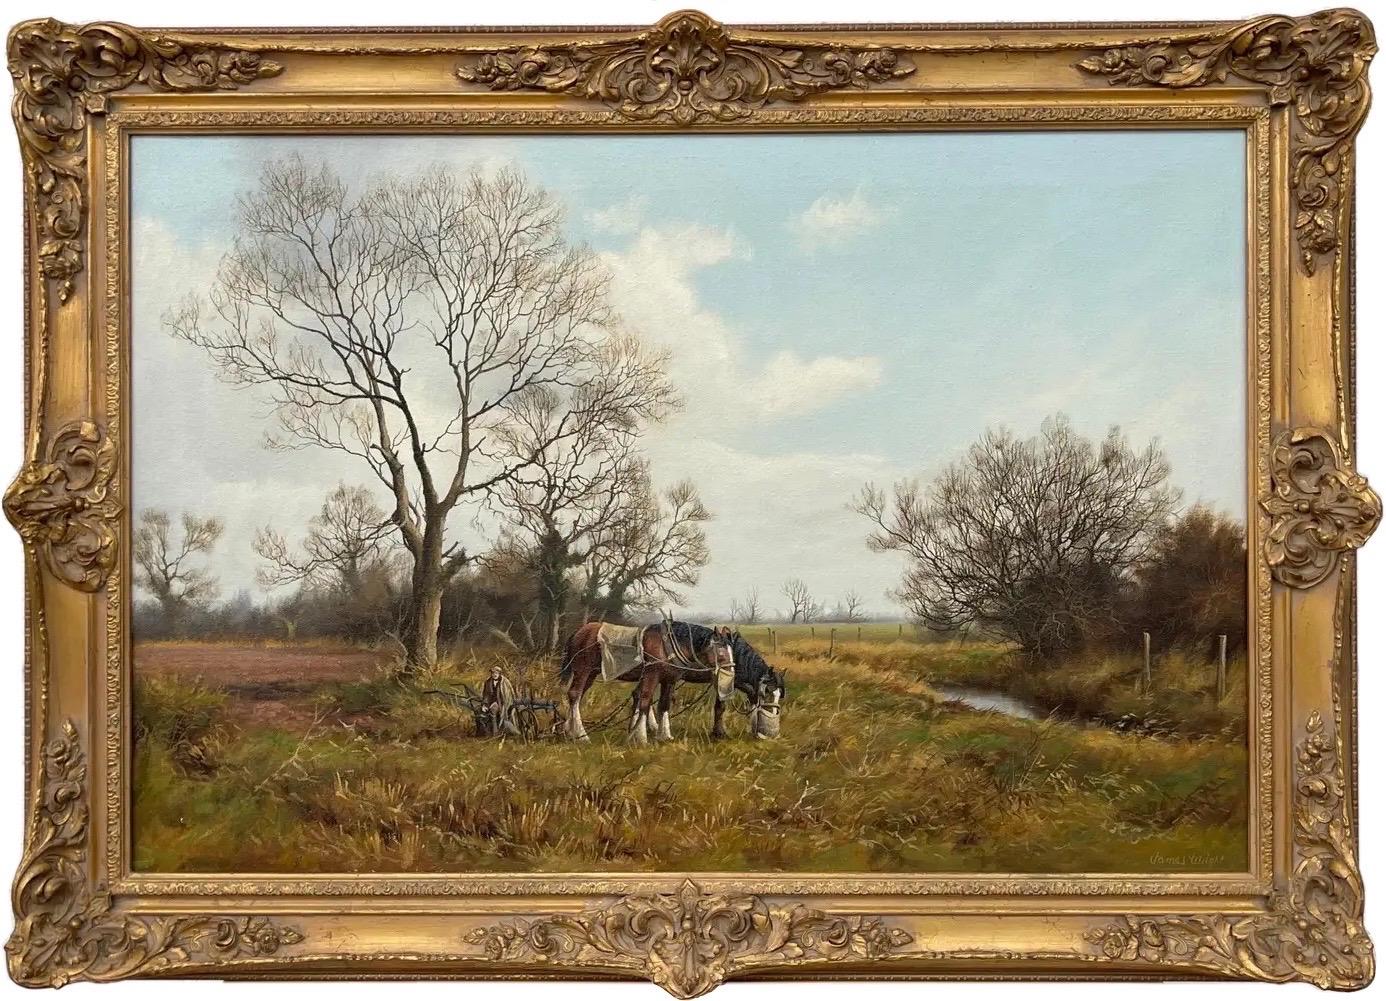 Painting of English Countryside with Horses & Plough by Modern British Artist